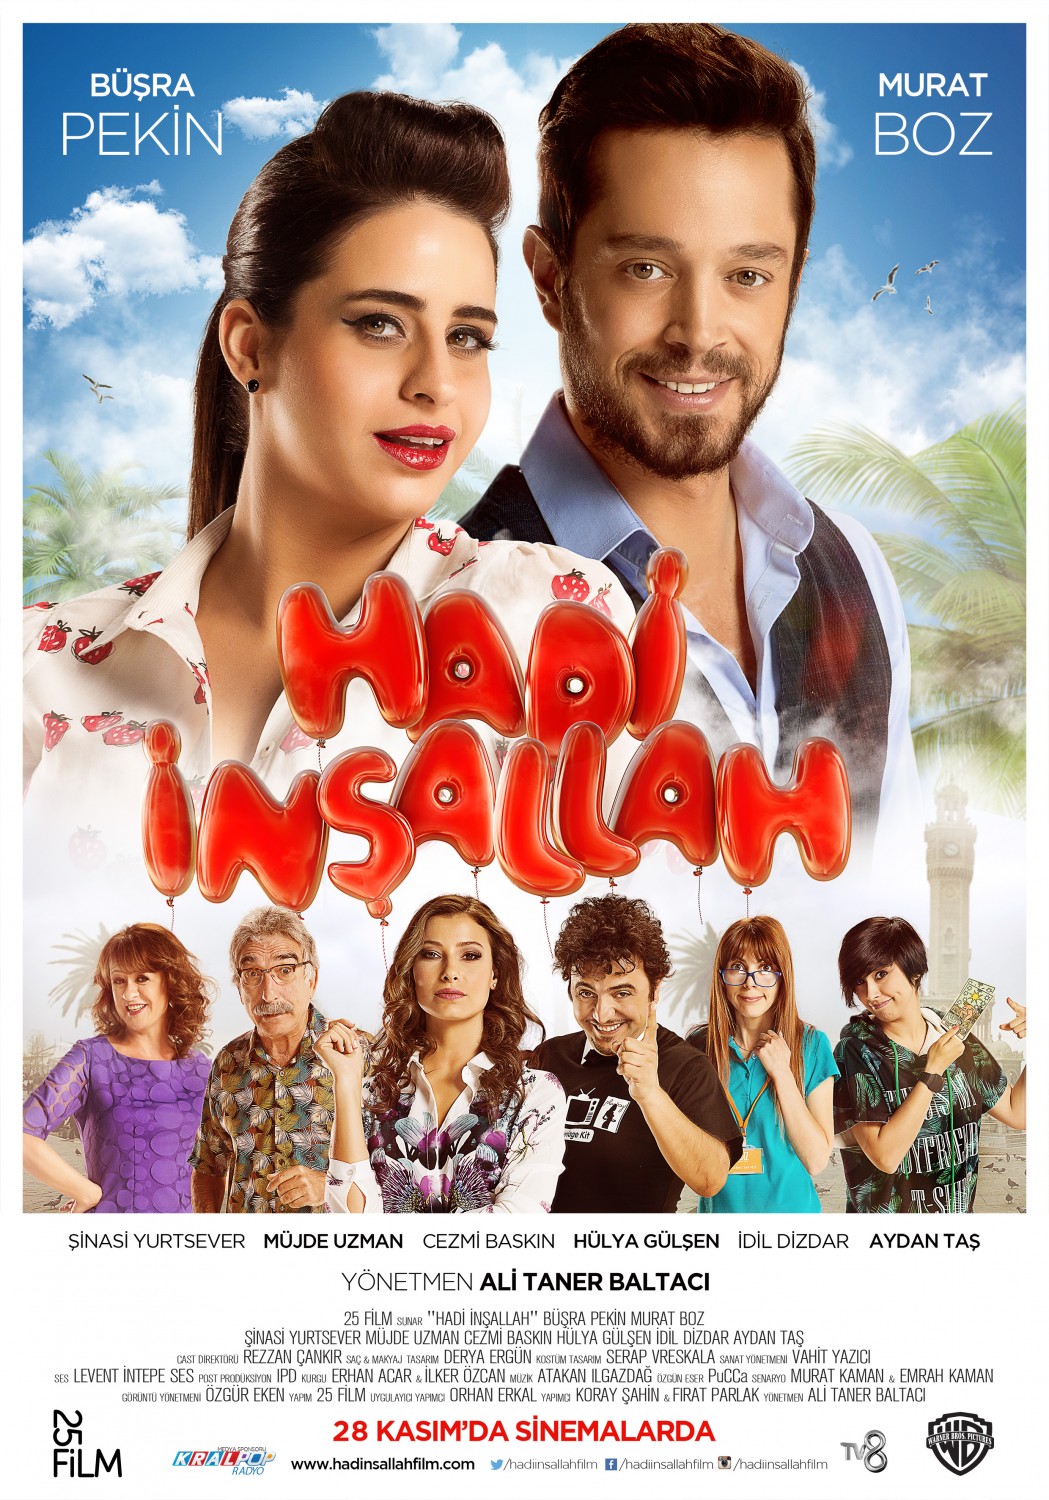 Extra Large Movie Poster Image for Hadi Insallah 